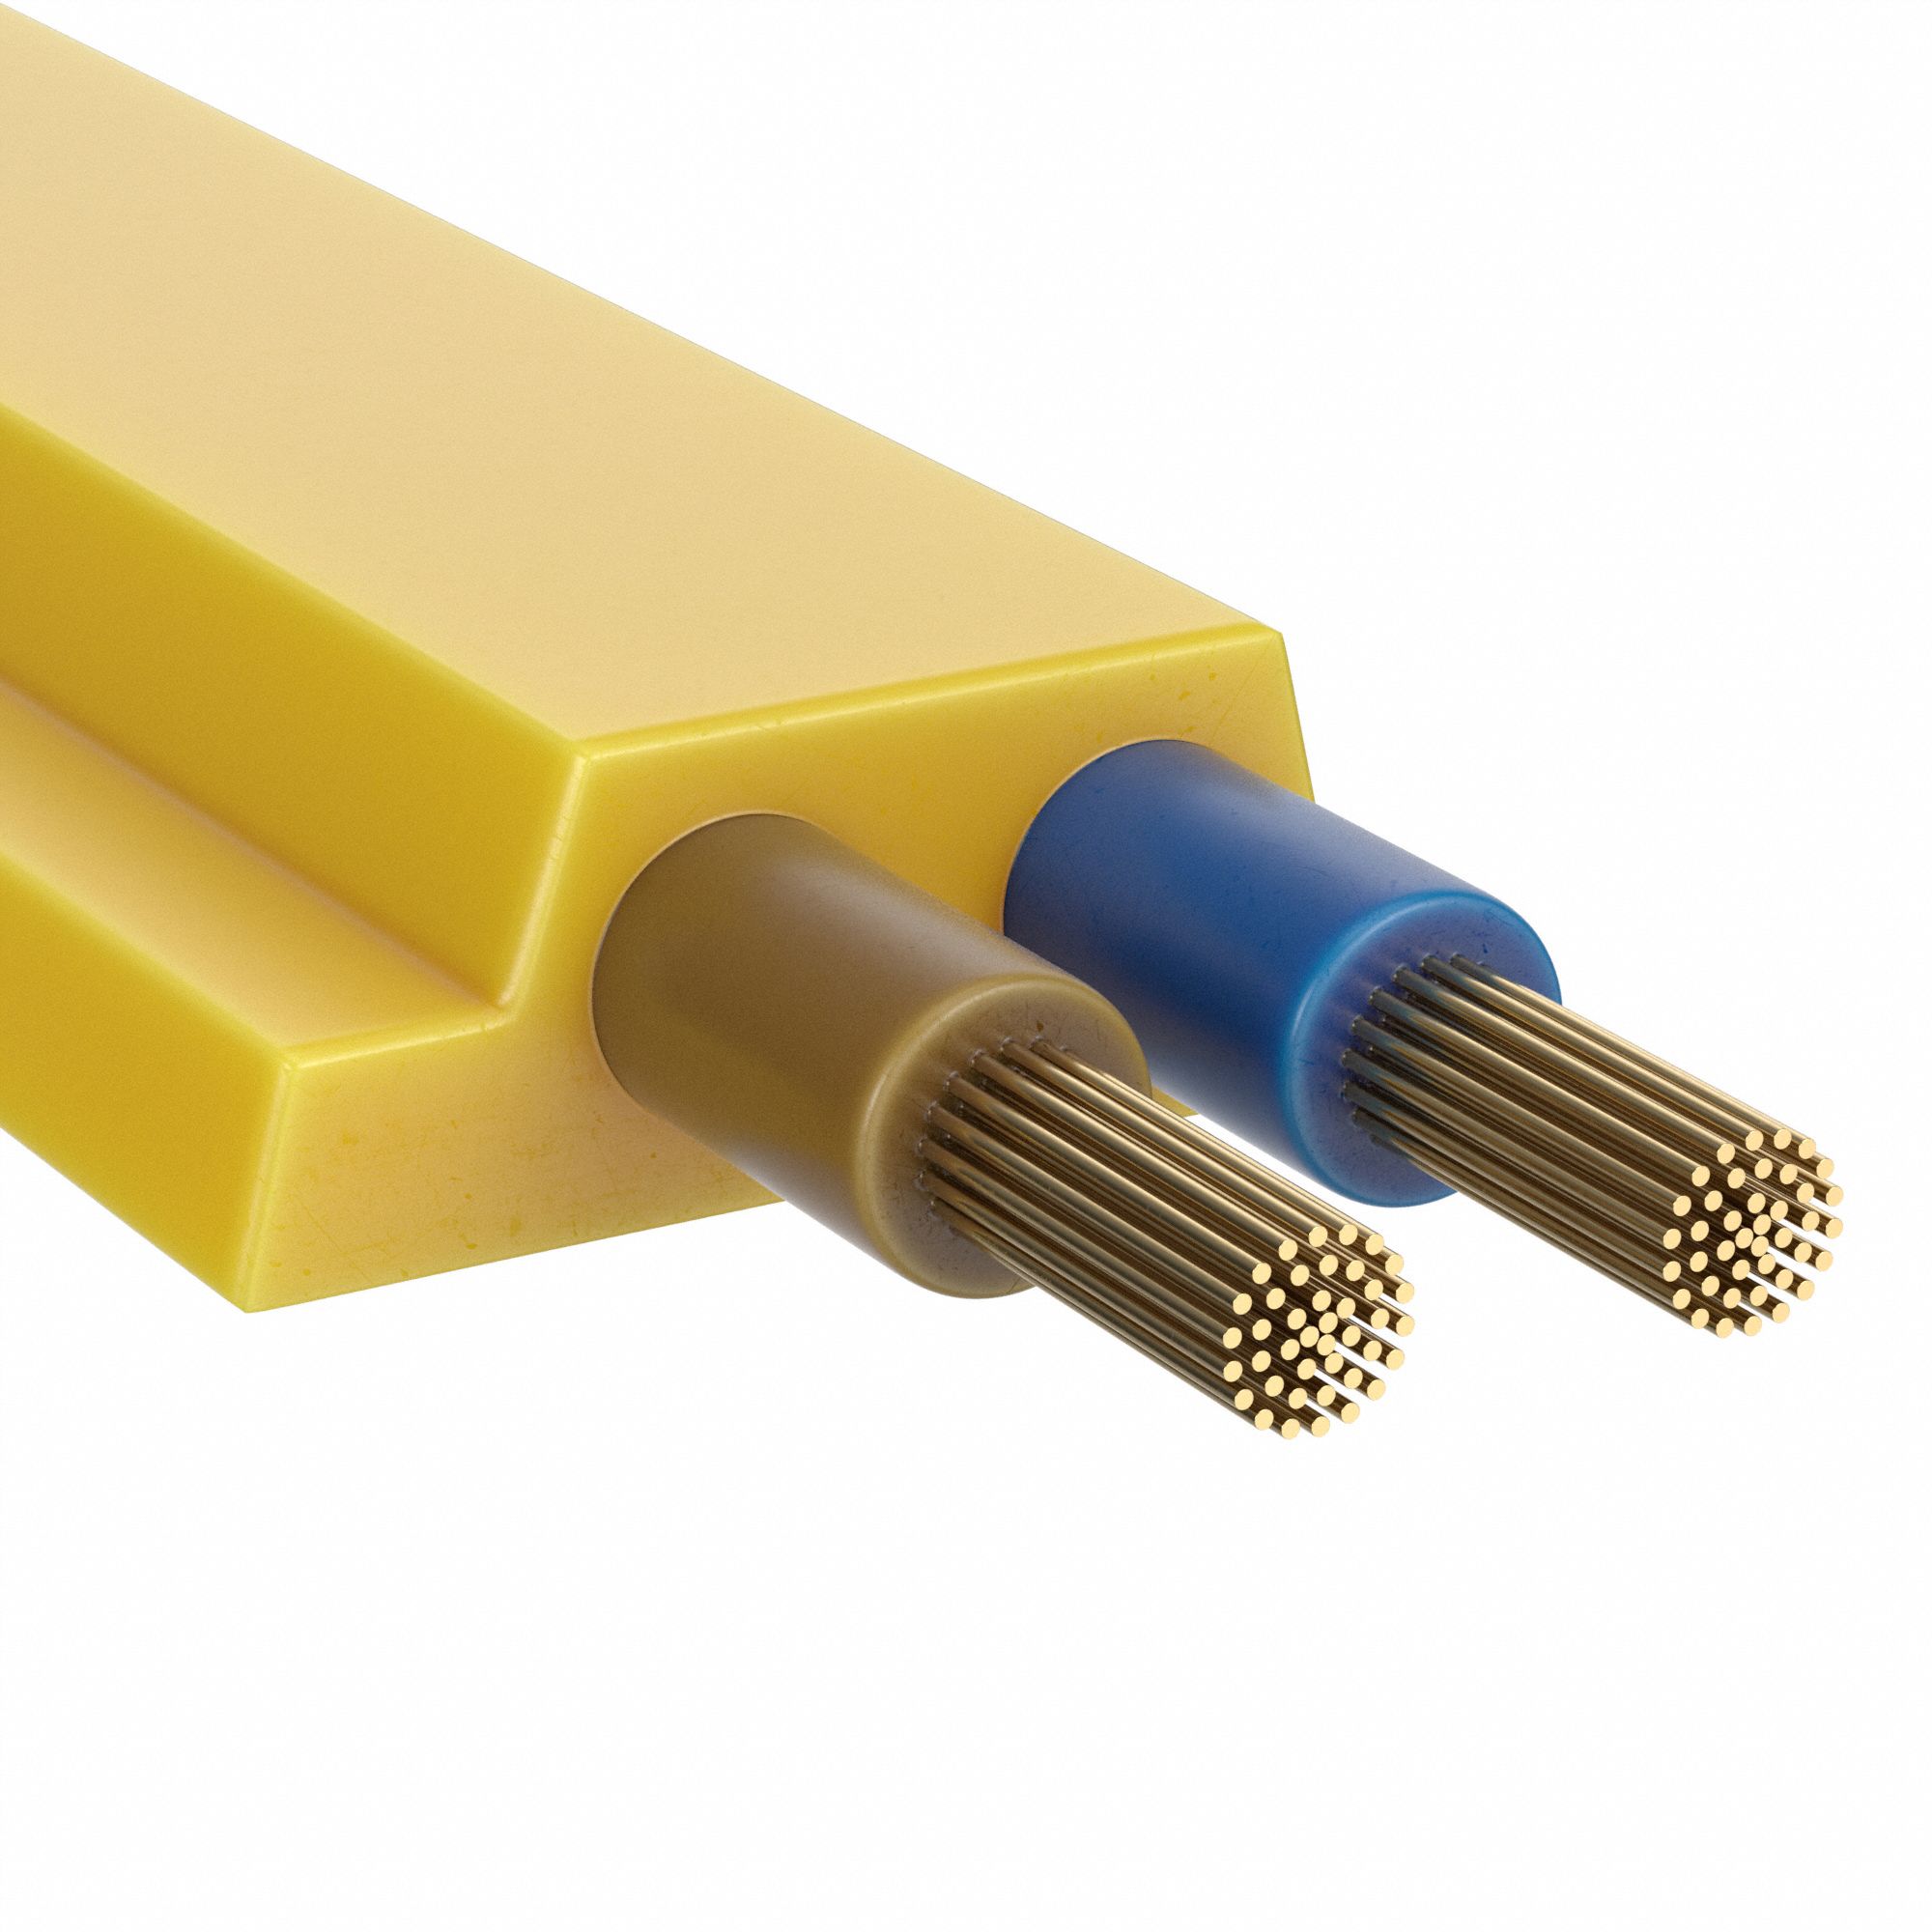 Cable, Electric Cable